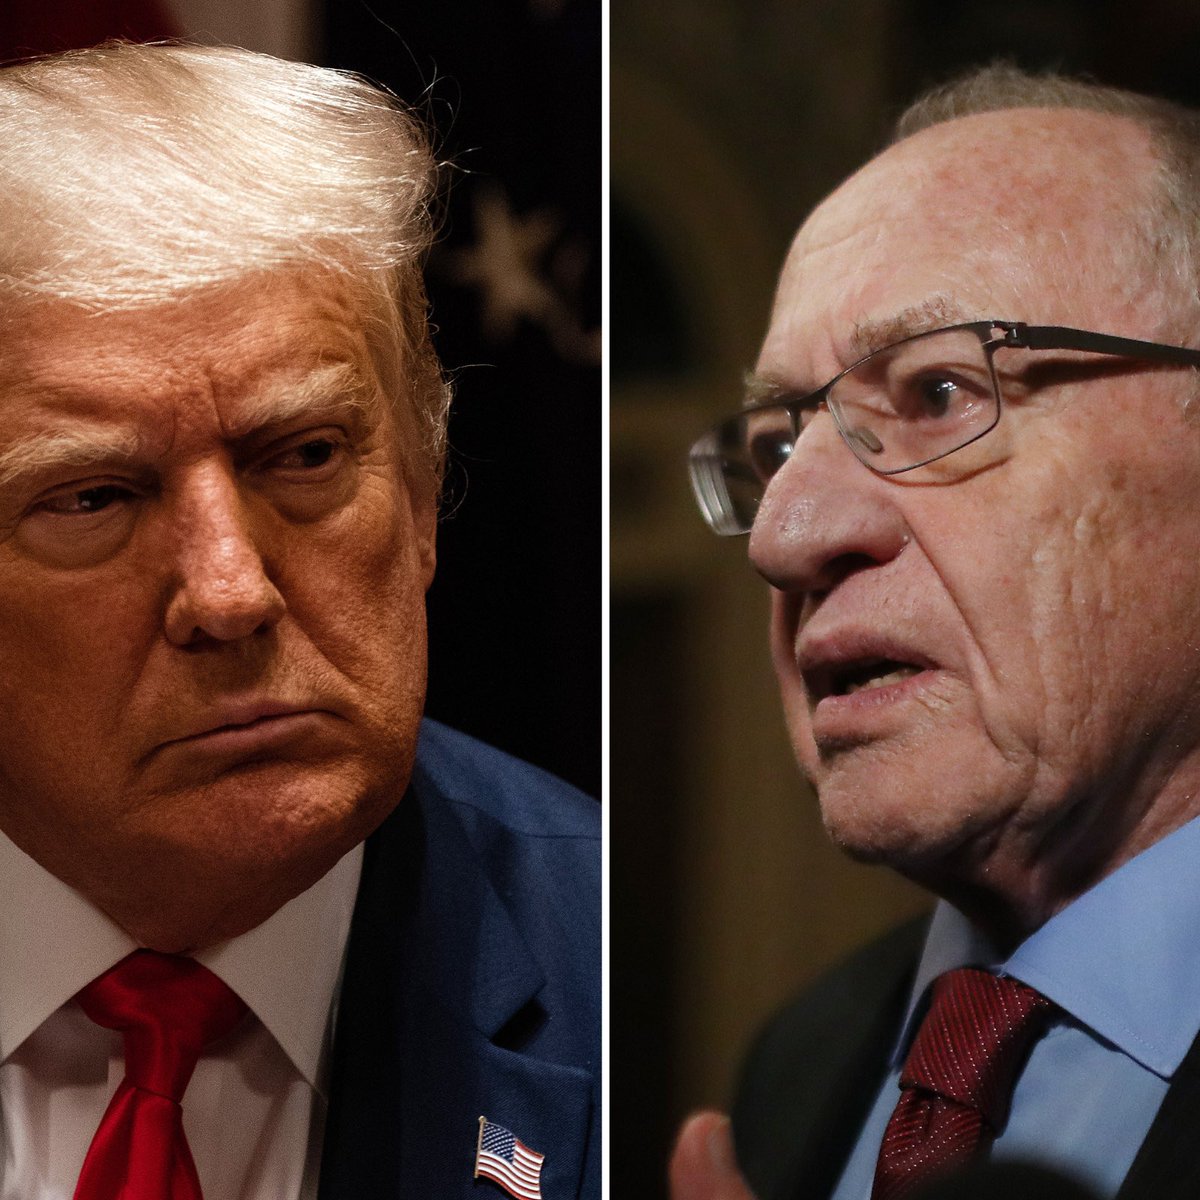 BREAKING: Trump is hit with more devastating news as Alan Dershowitz, the lawyer who defended him at his impeachment hearings, betrays him, declaring that Special Counsel Jack Smith’s indictment is like “a gun with Trump’s fingerprints on it.”

But Dershowitz didn’t stop there……